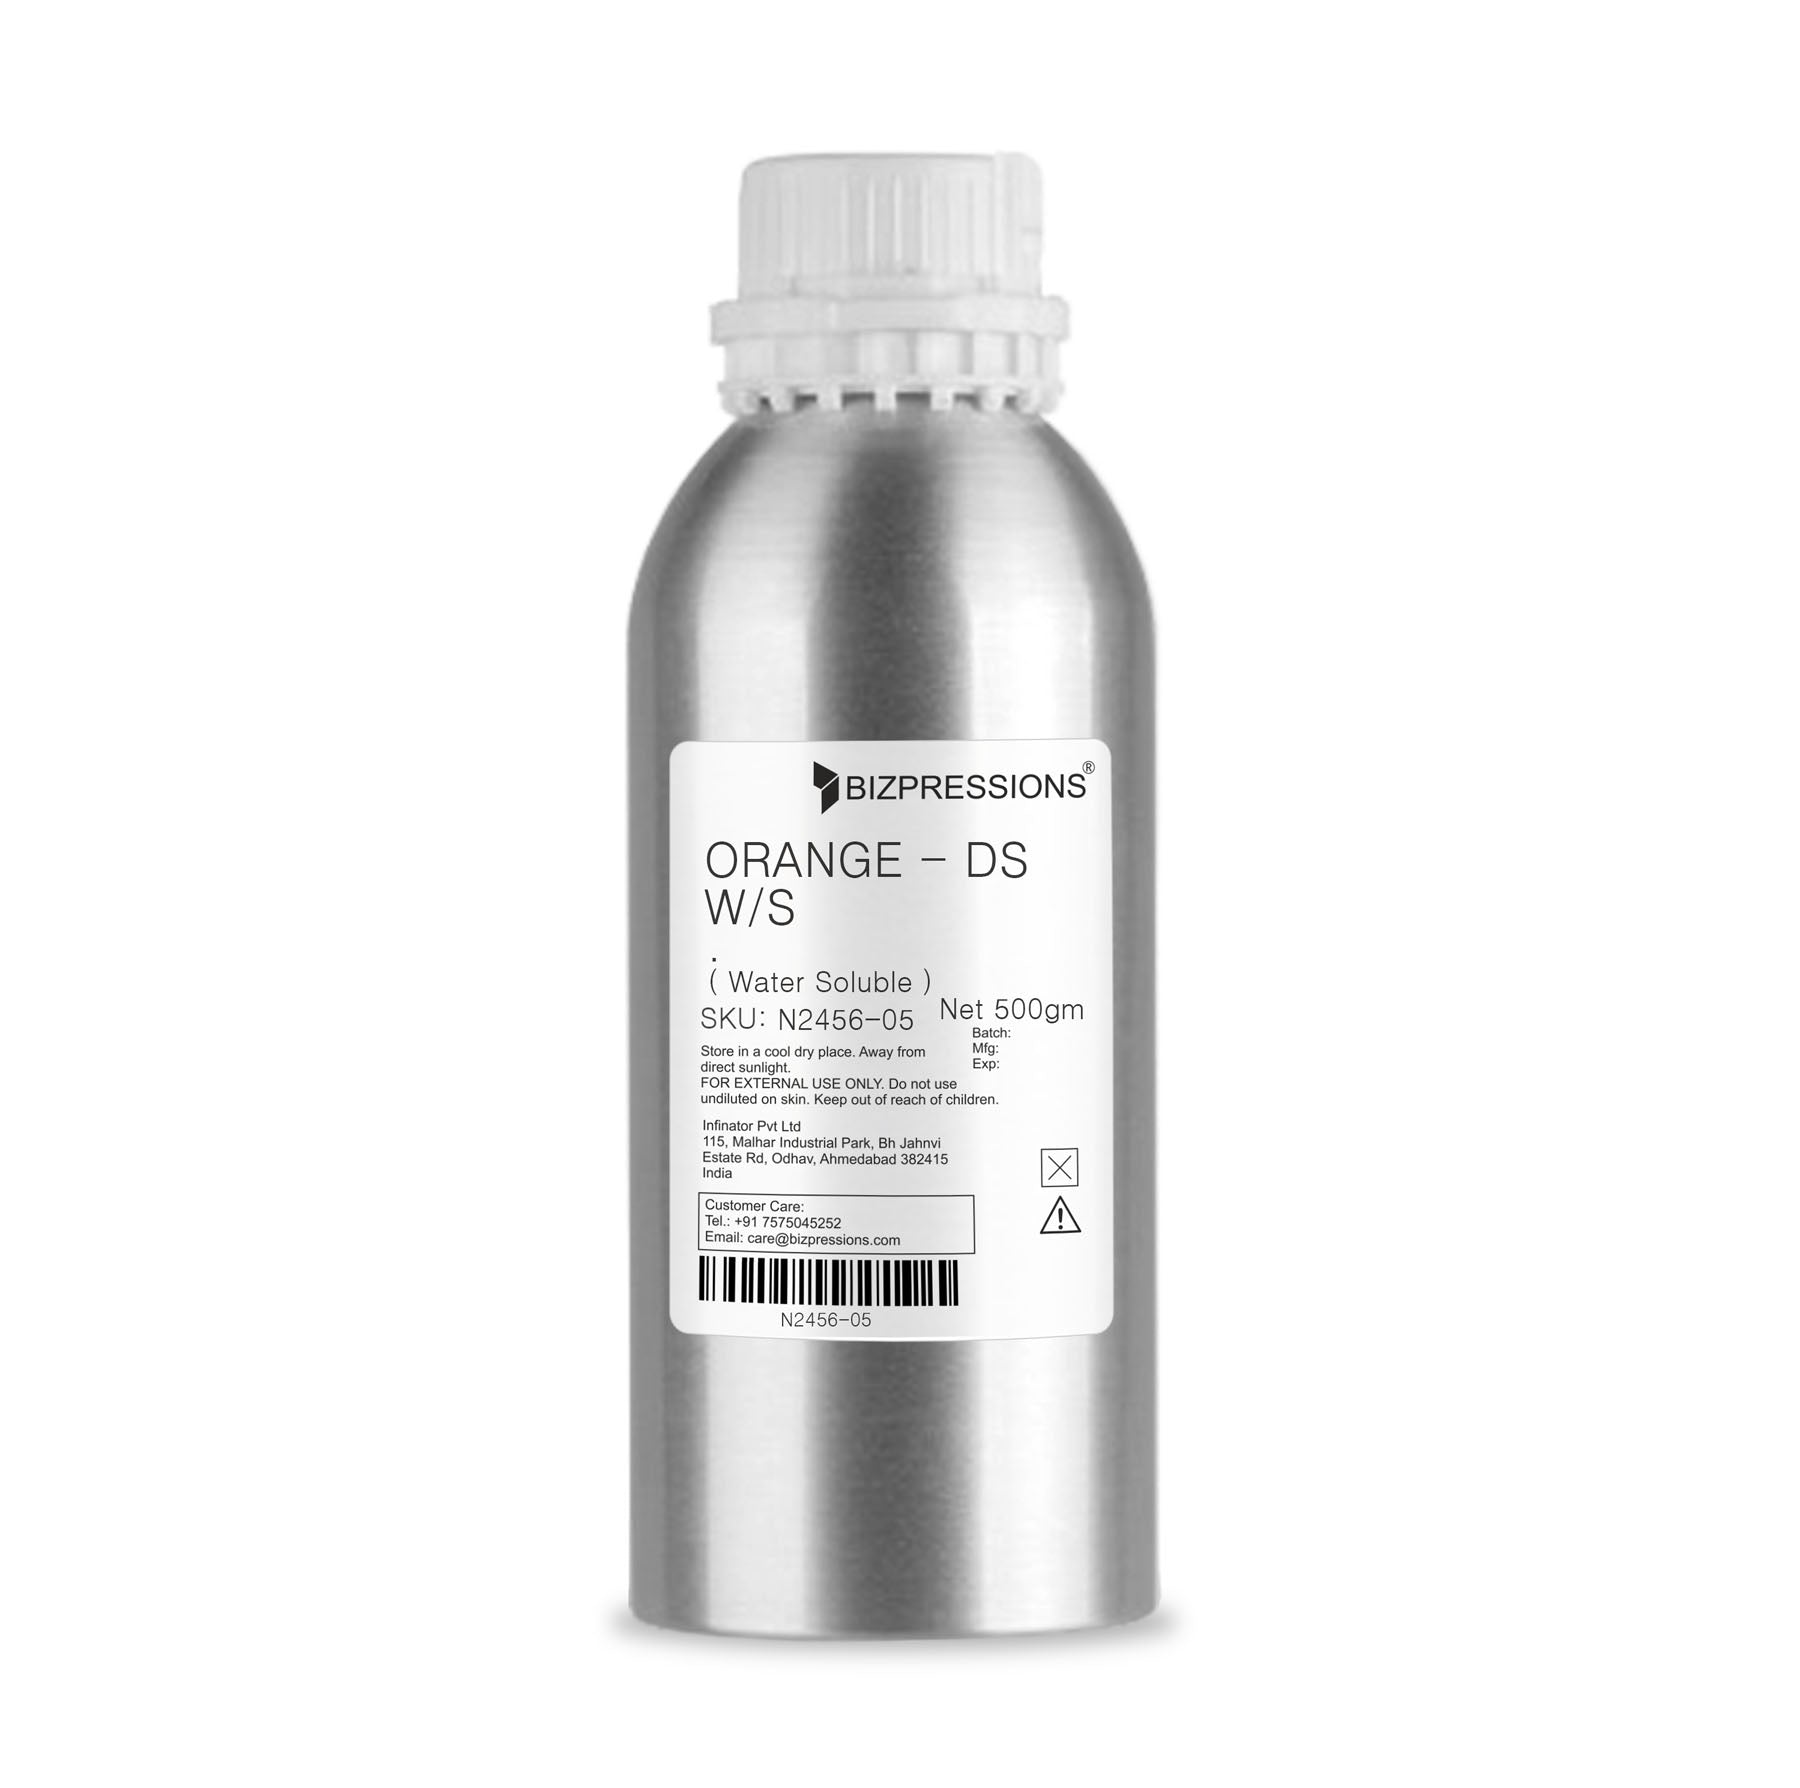 ORANGE - DS W/S - Fragrance ( Water Soluble ) - 500 gm